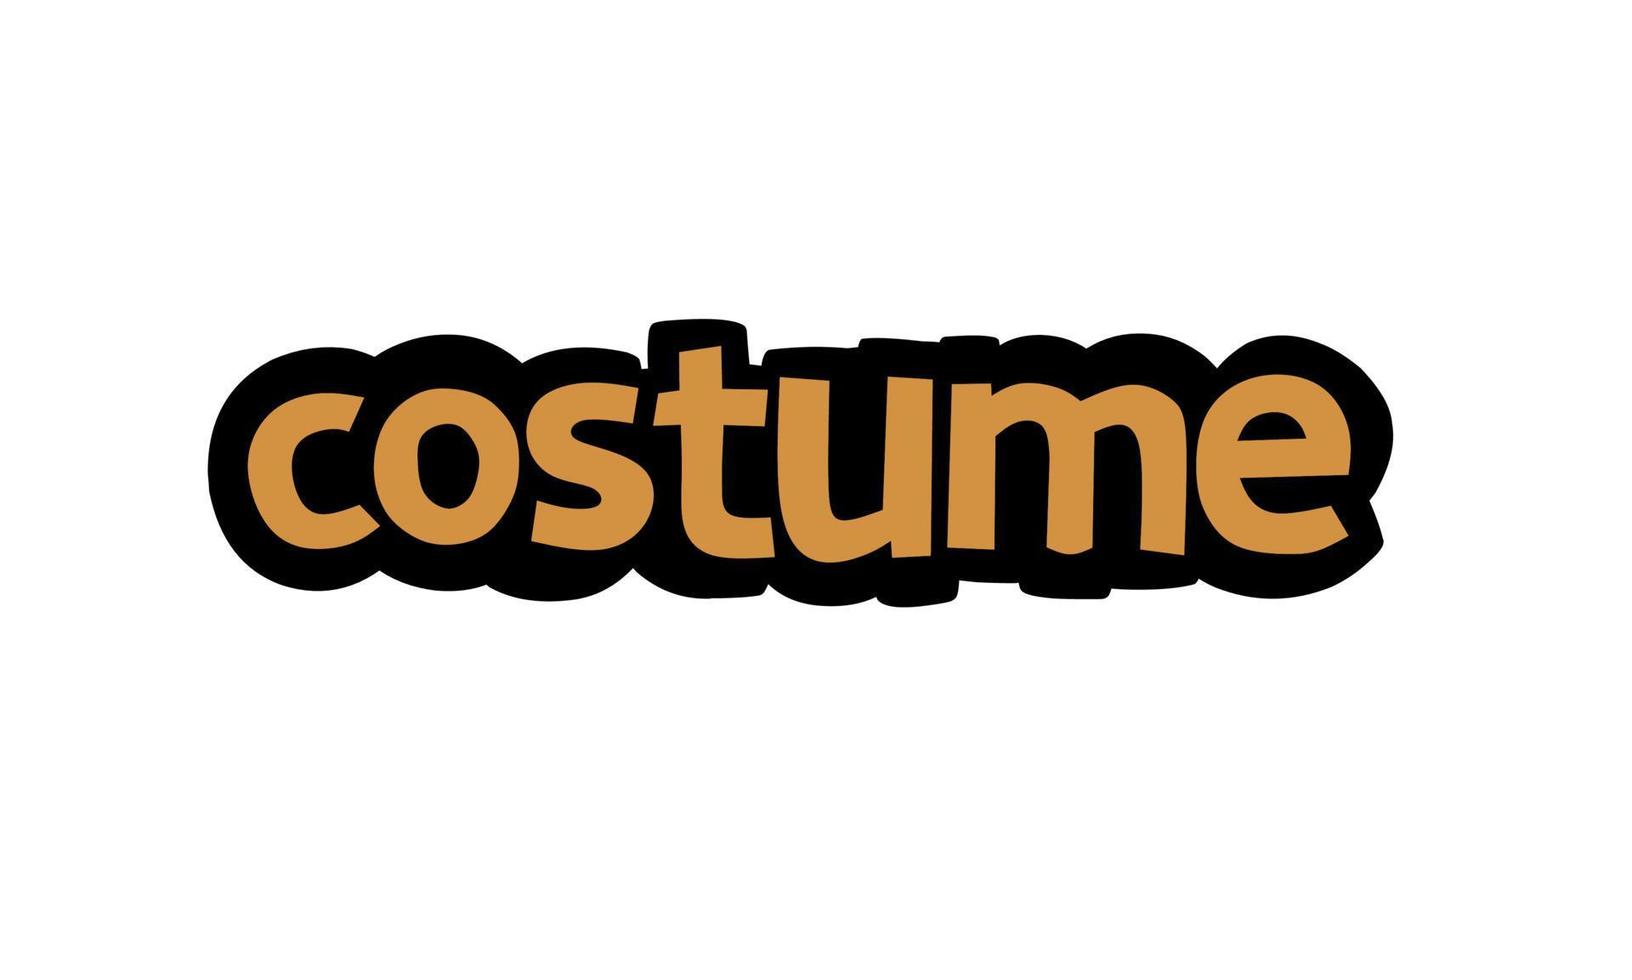 COSTUME writing vector design on white background